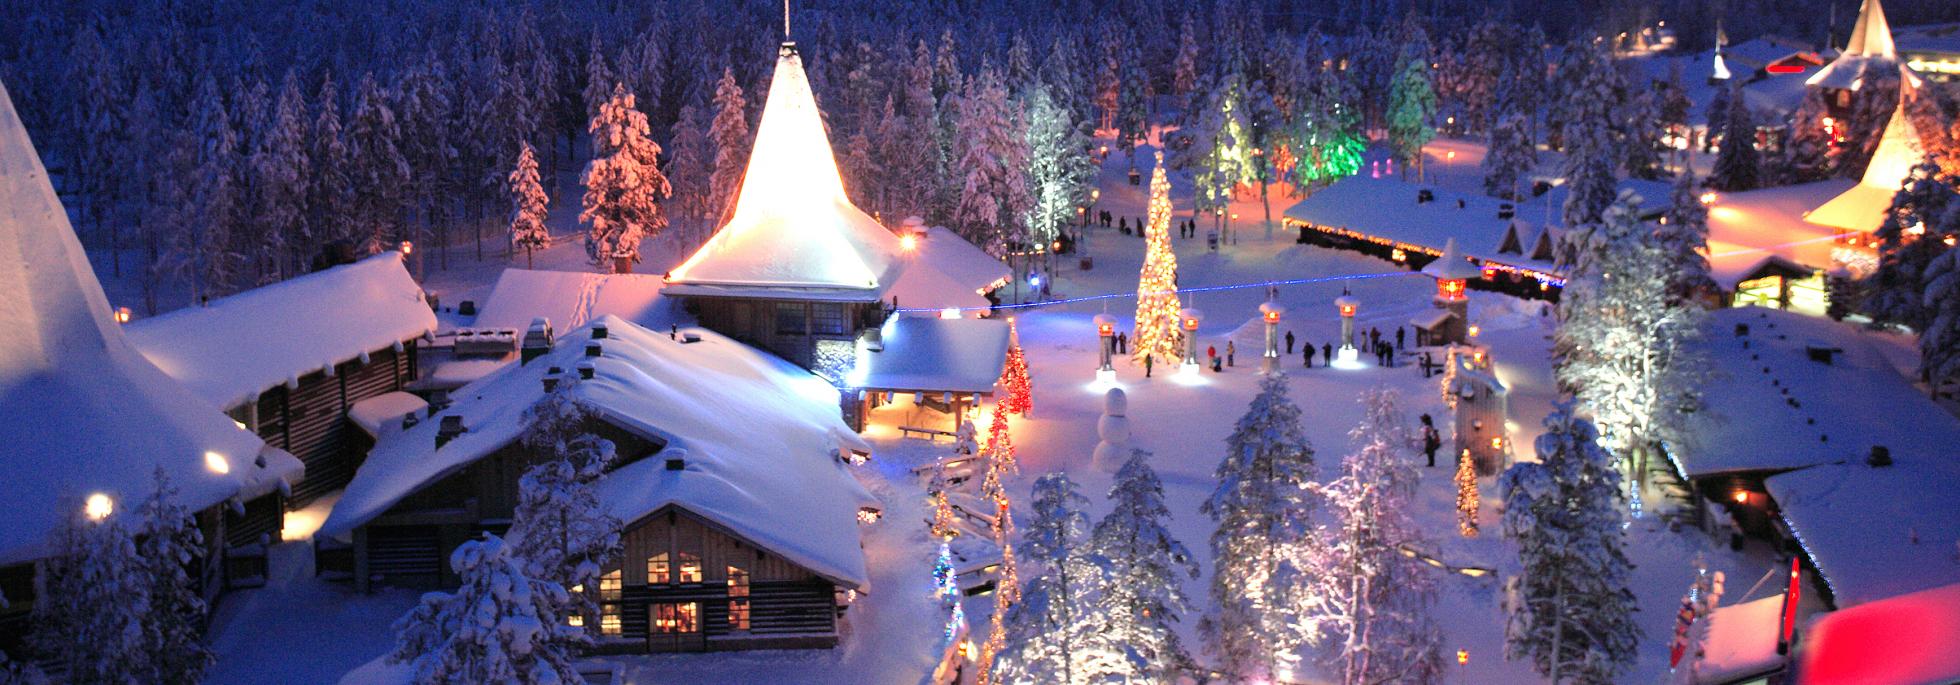 sights-and-attractions-in-rovaniemi-lapland